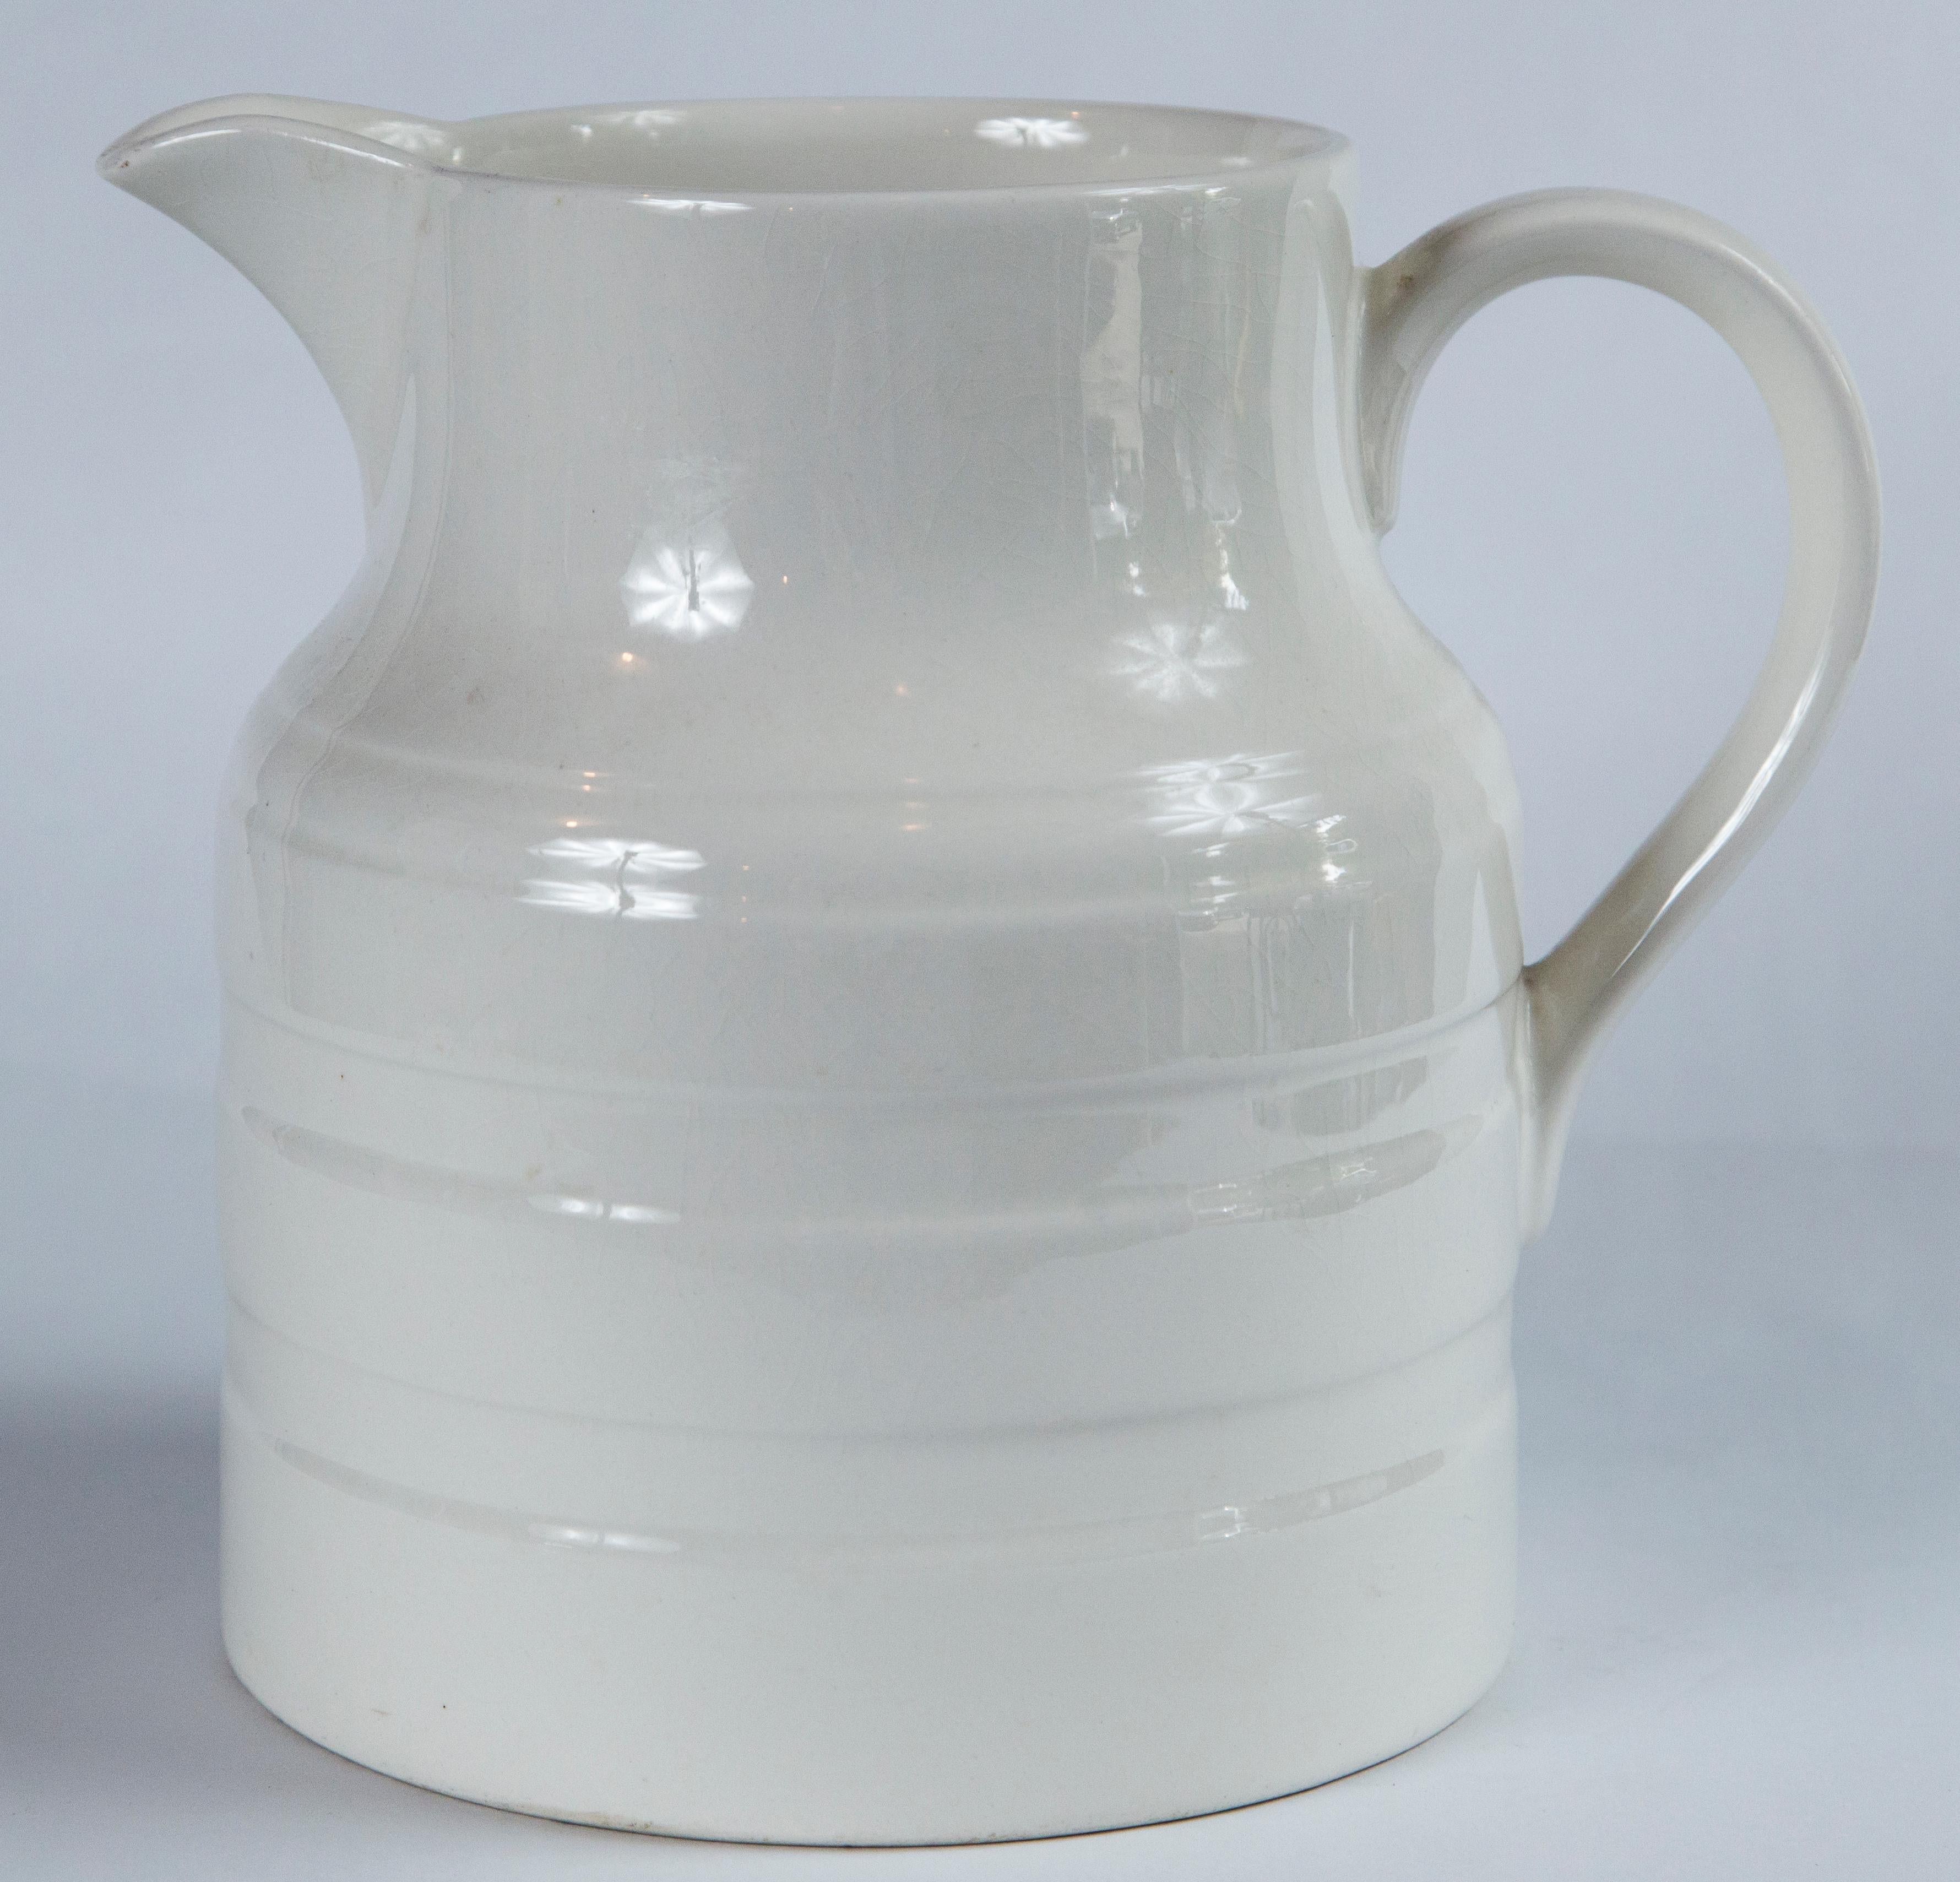 English Ironstone Dairy Pitcher, circa 1920. Extra large 7 pint size with raised band design. Manufactured by Lord Nelson Pottery, England.